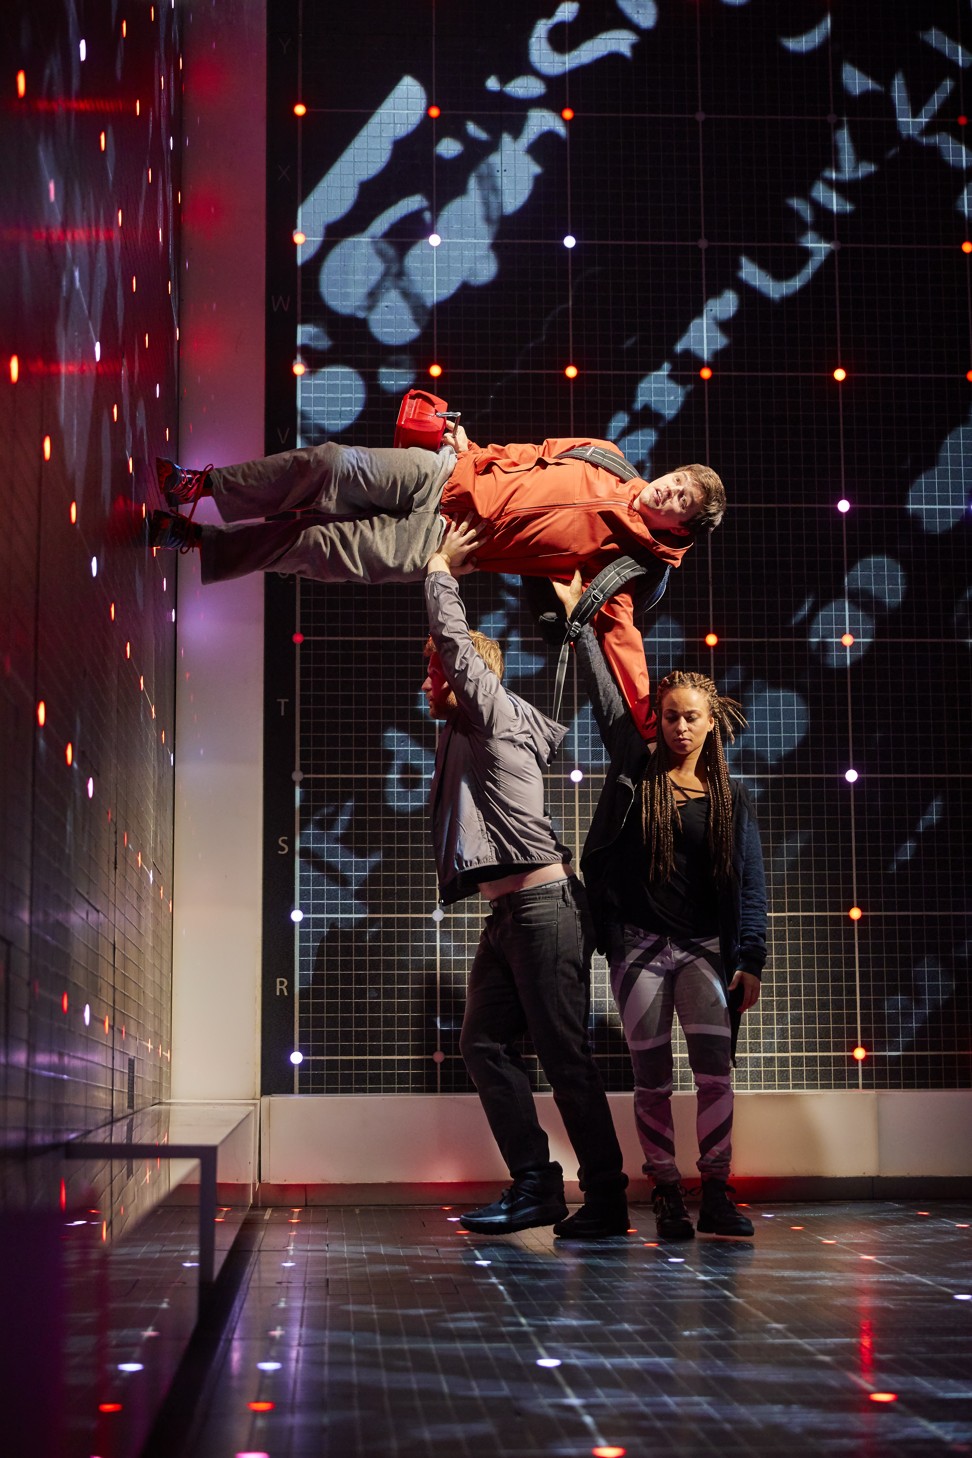 Jenkins as Christopher Boone, Matt Wilman plays Mr Thompson and Crystal Condie as Punk Girl in a scene from The Curious Incident of the Dog in the Night-Time.